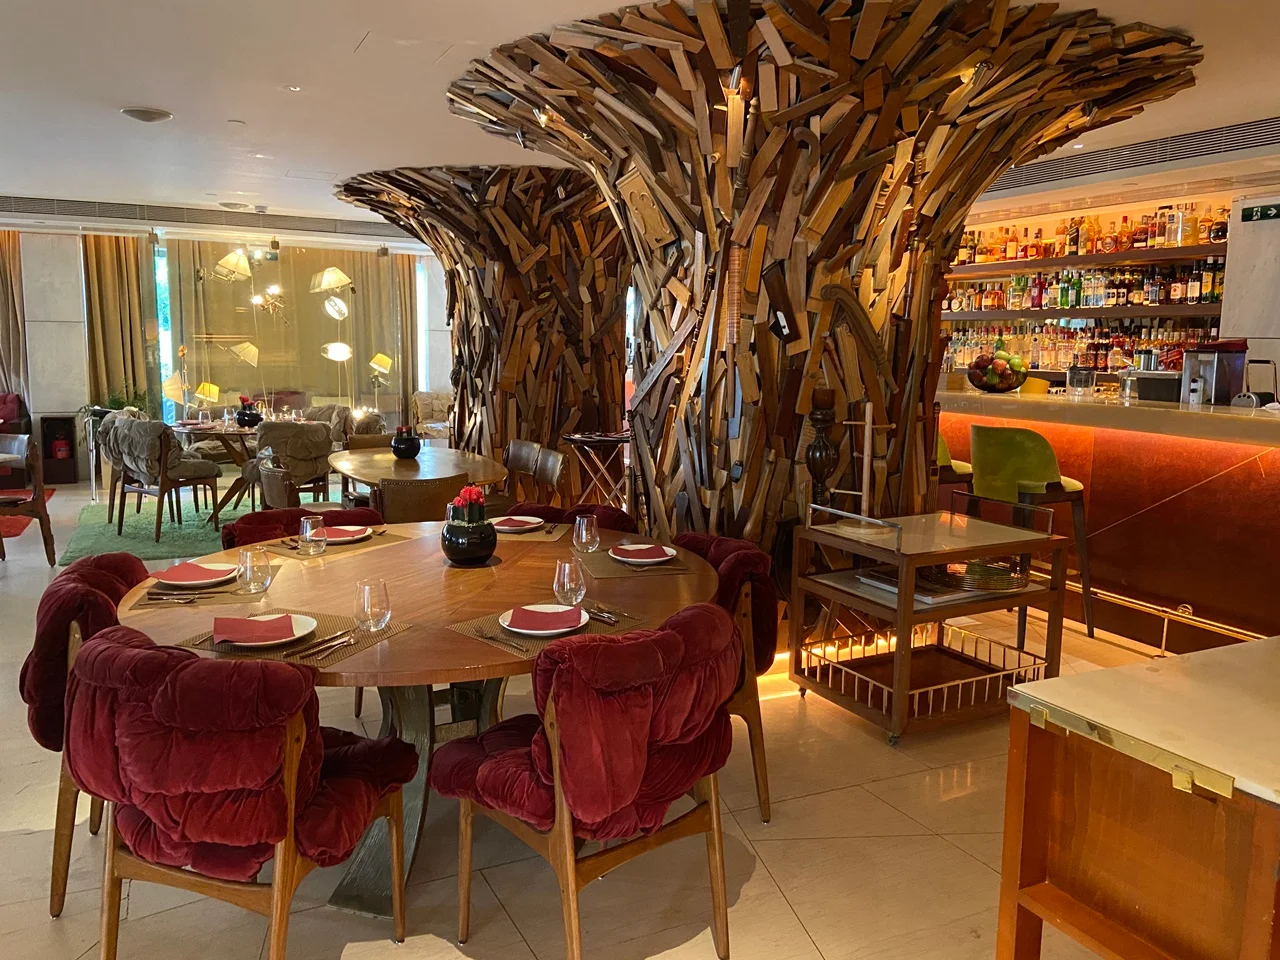 The Art Lounge in NEW Hotel Athens showing its artistic designs.